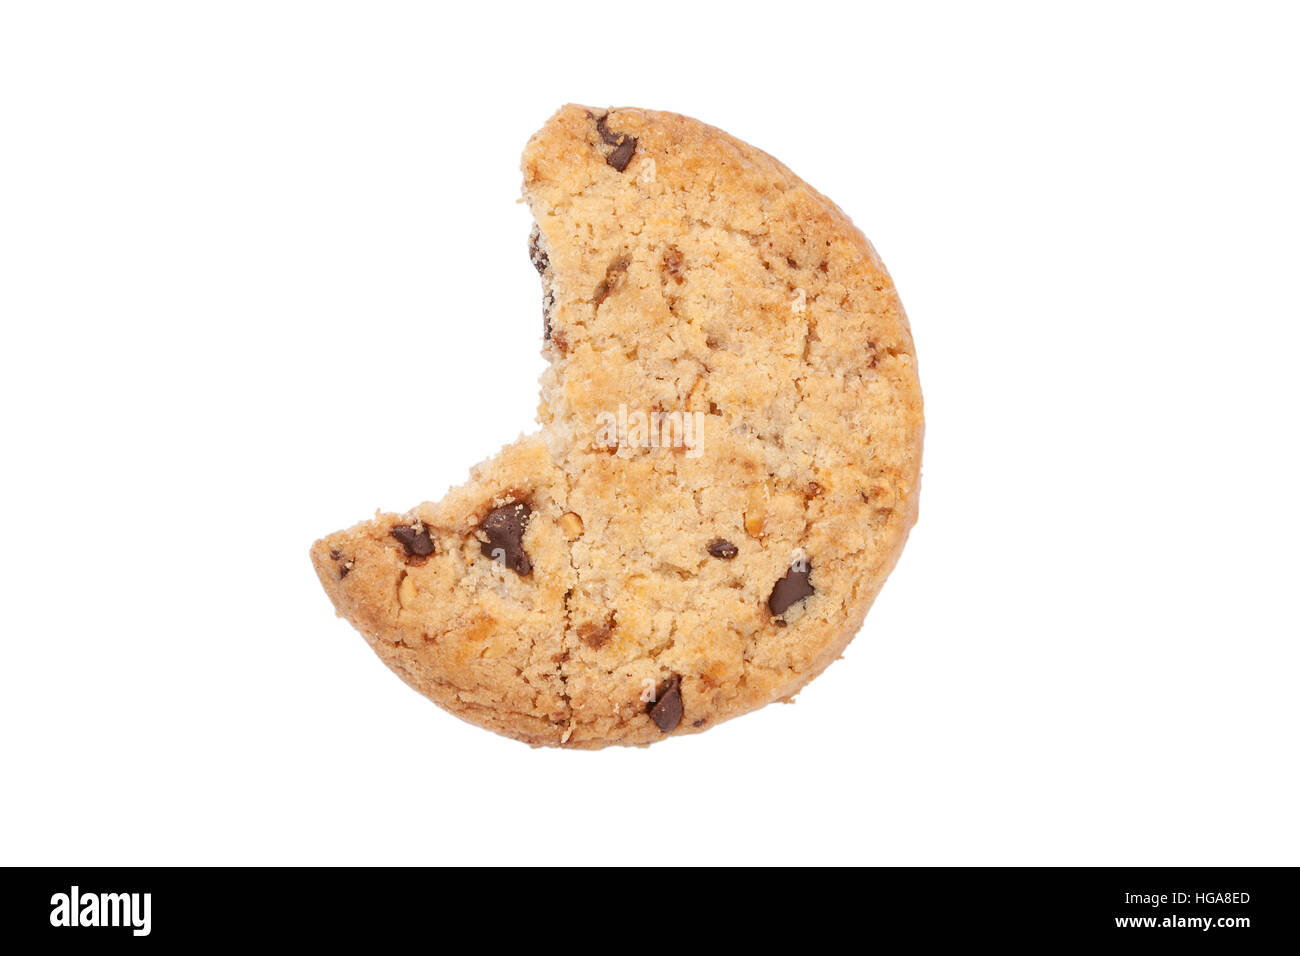 Bitten chocolate chip cookie isolated on white background. Stock Photo